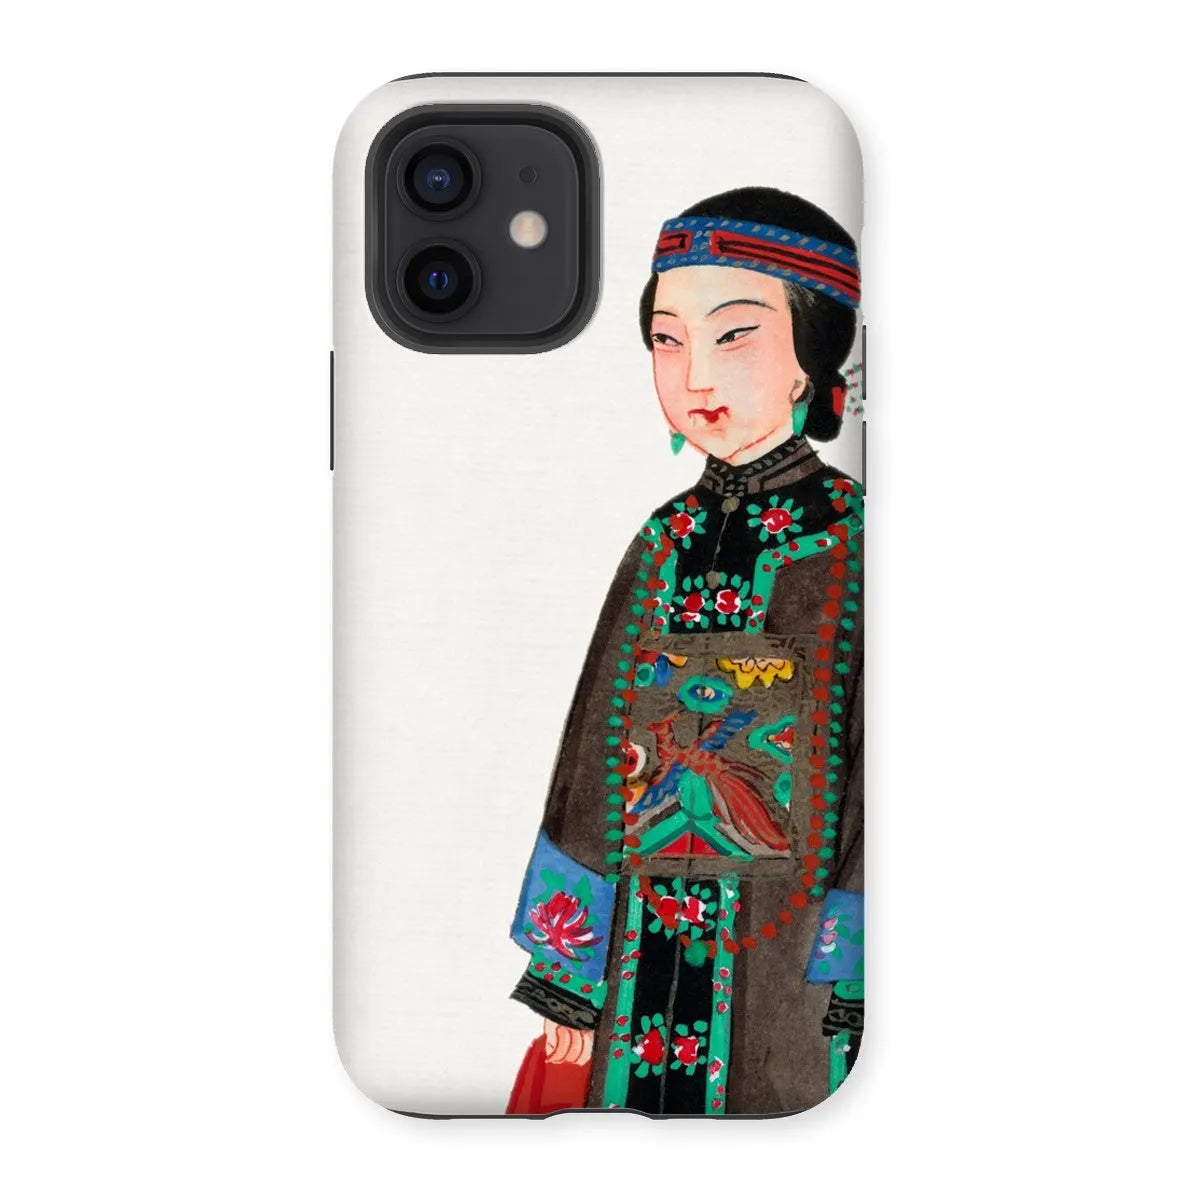 Noblewoman At Court - Chinese Aesthetic Art Phone Case - Iphone 12 / Matte - Mobile Phone Cases - Aesthetic Art